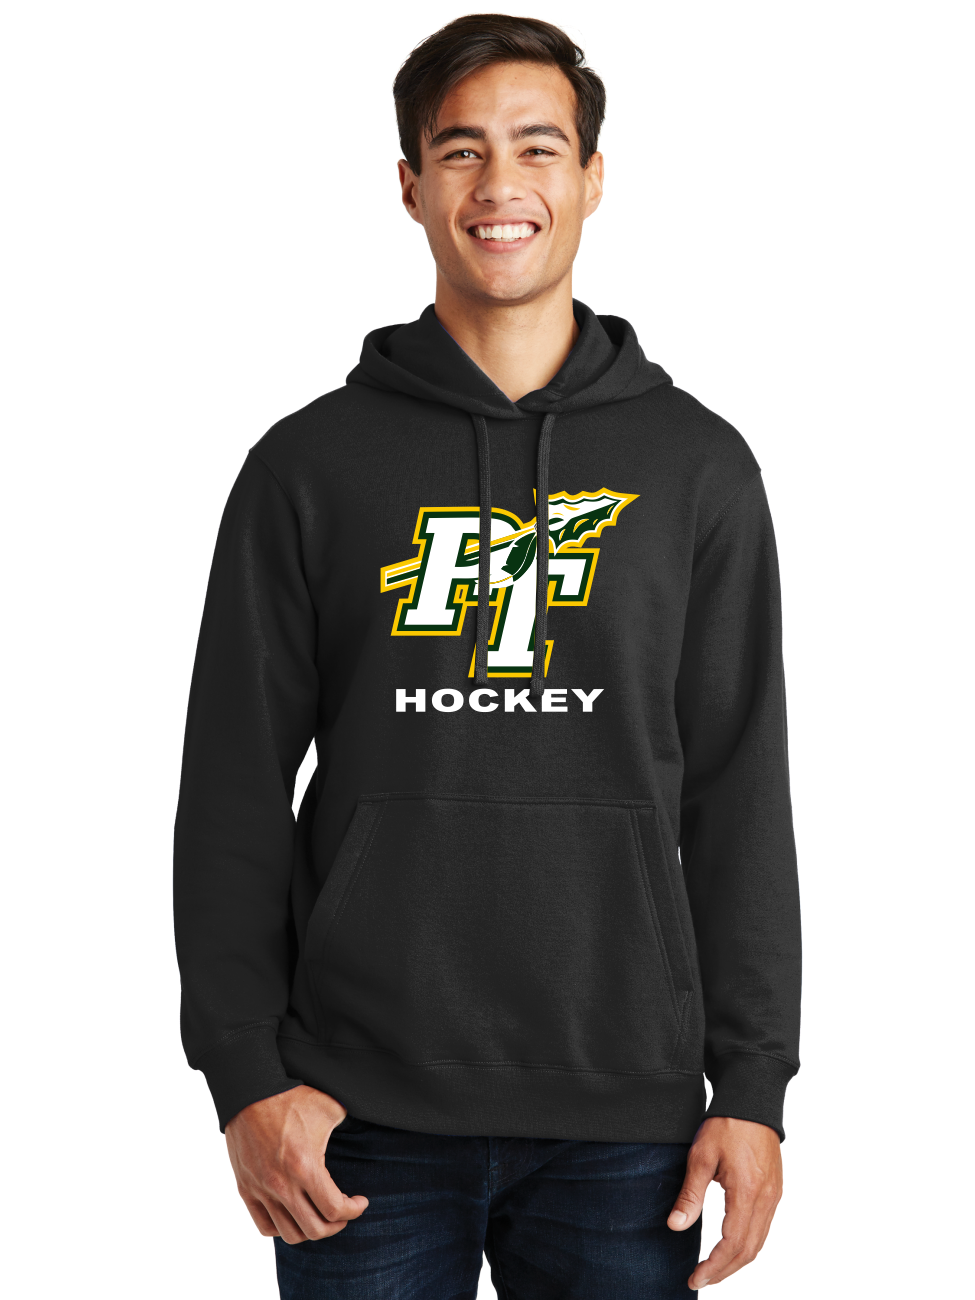 Logo Hoodie - Penn Trafford - Multiple Colors Available